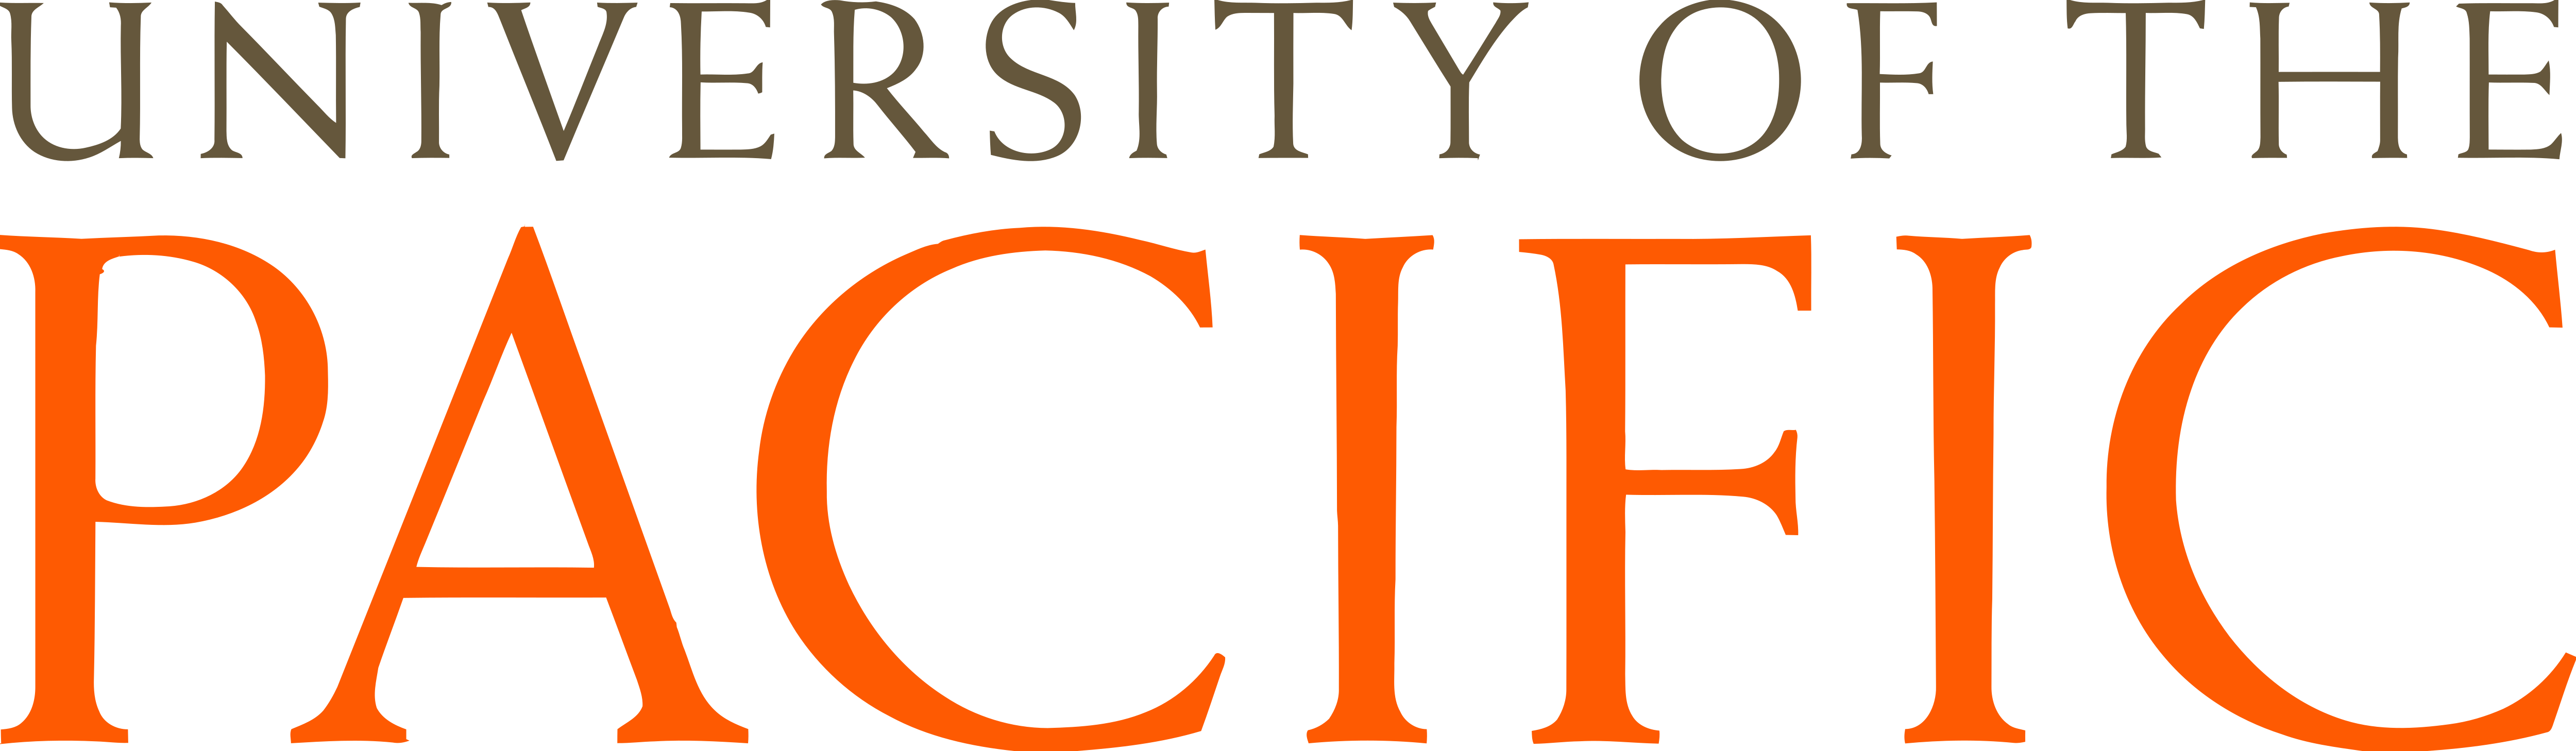 University of the Pacific ? Logos Download